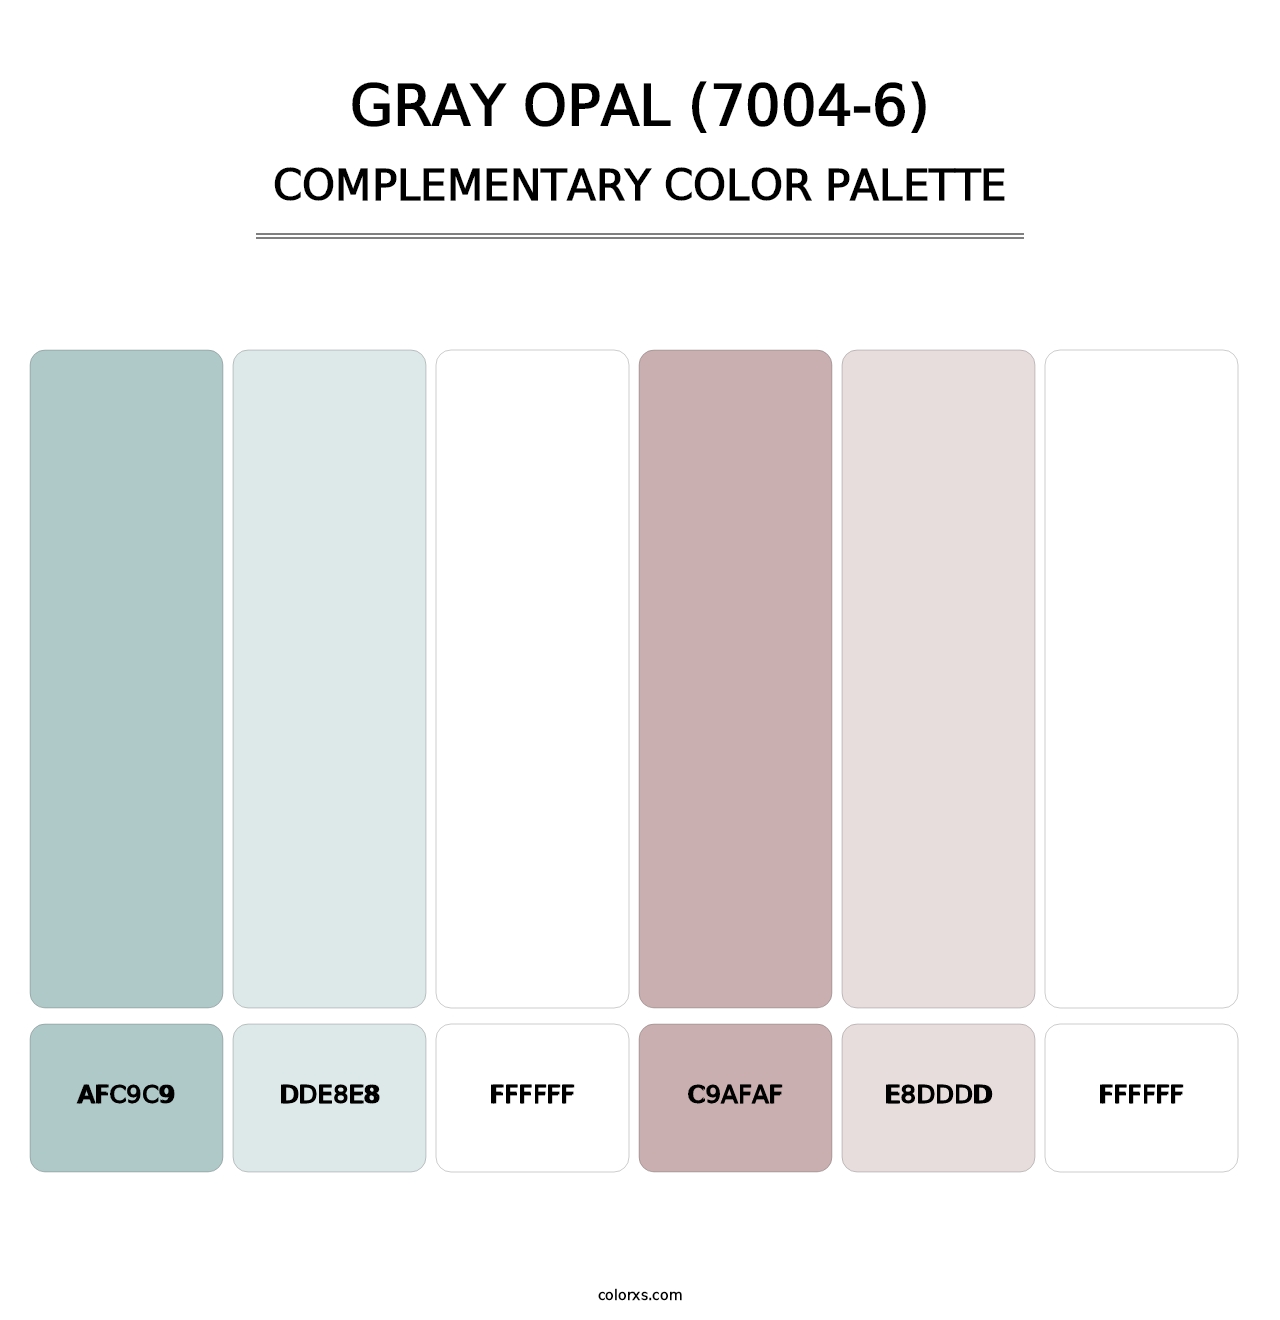 Gray Opal (7004-6) - Complementary Color Palette